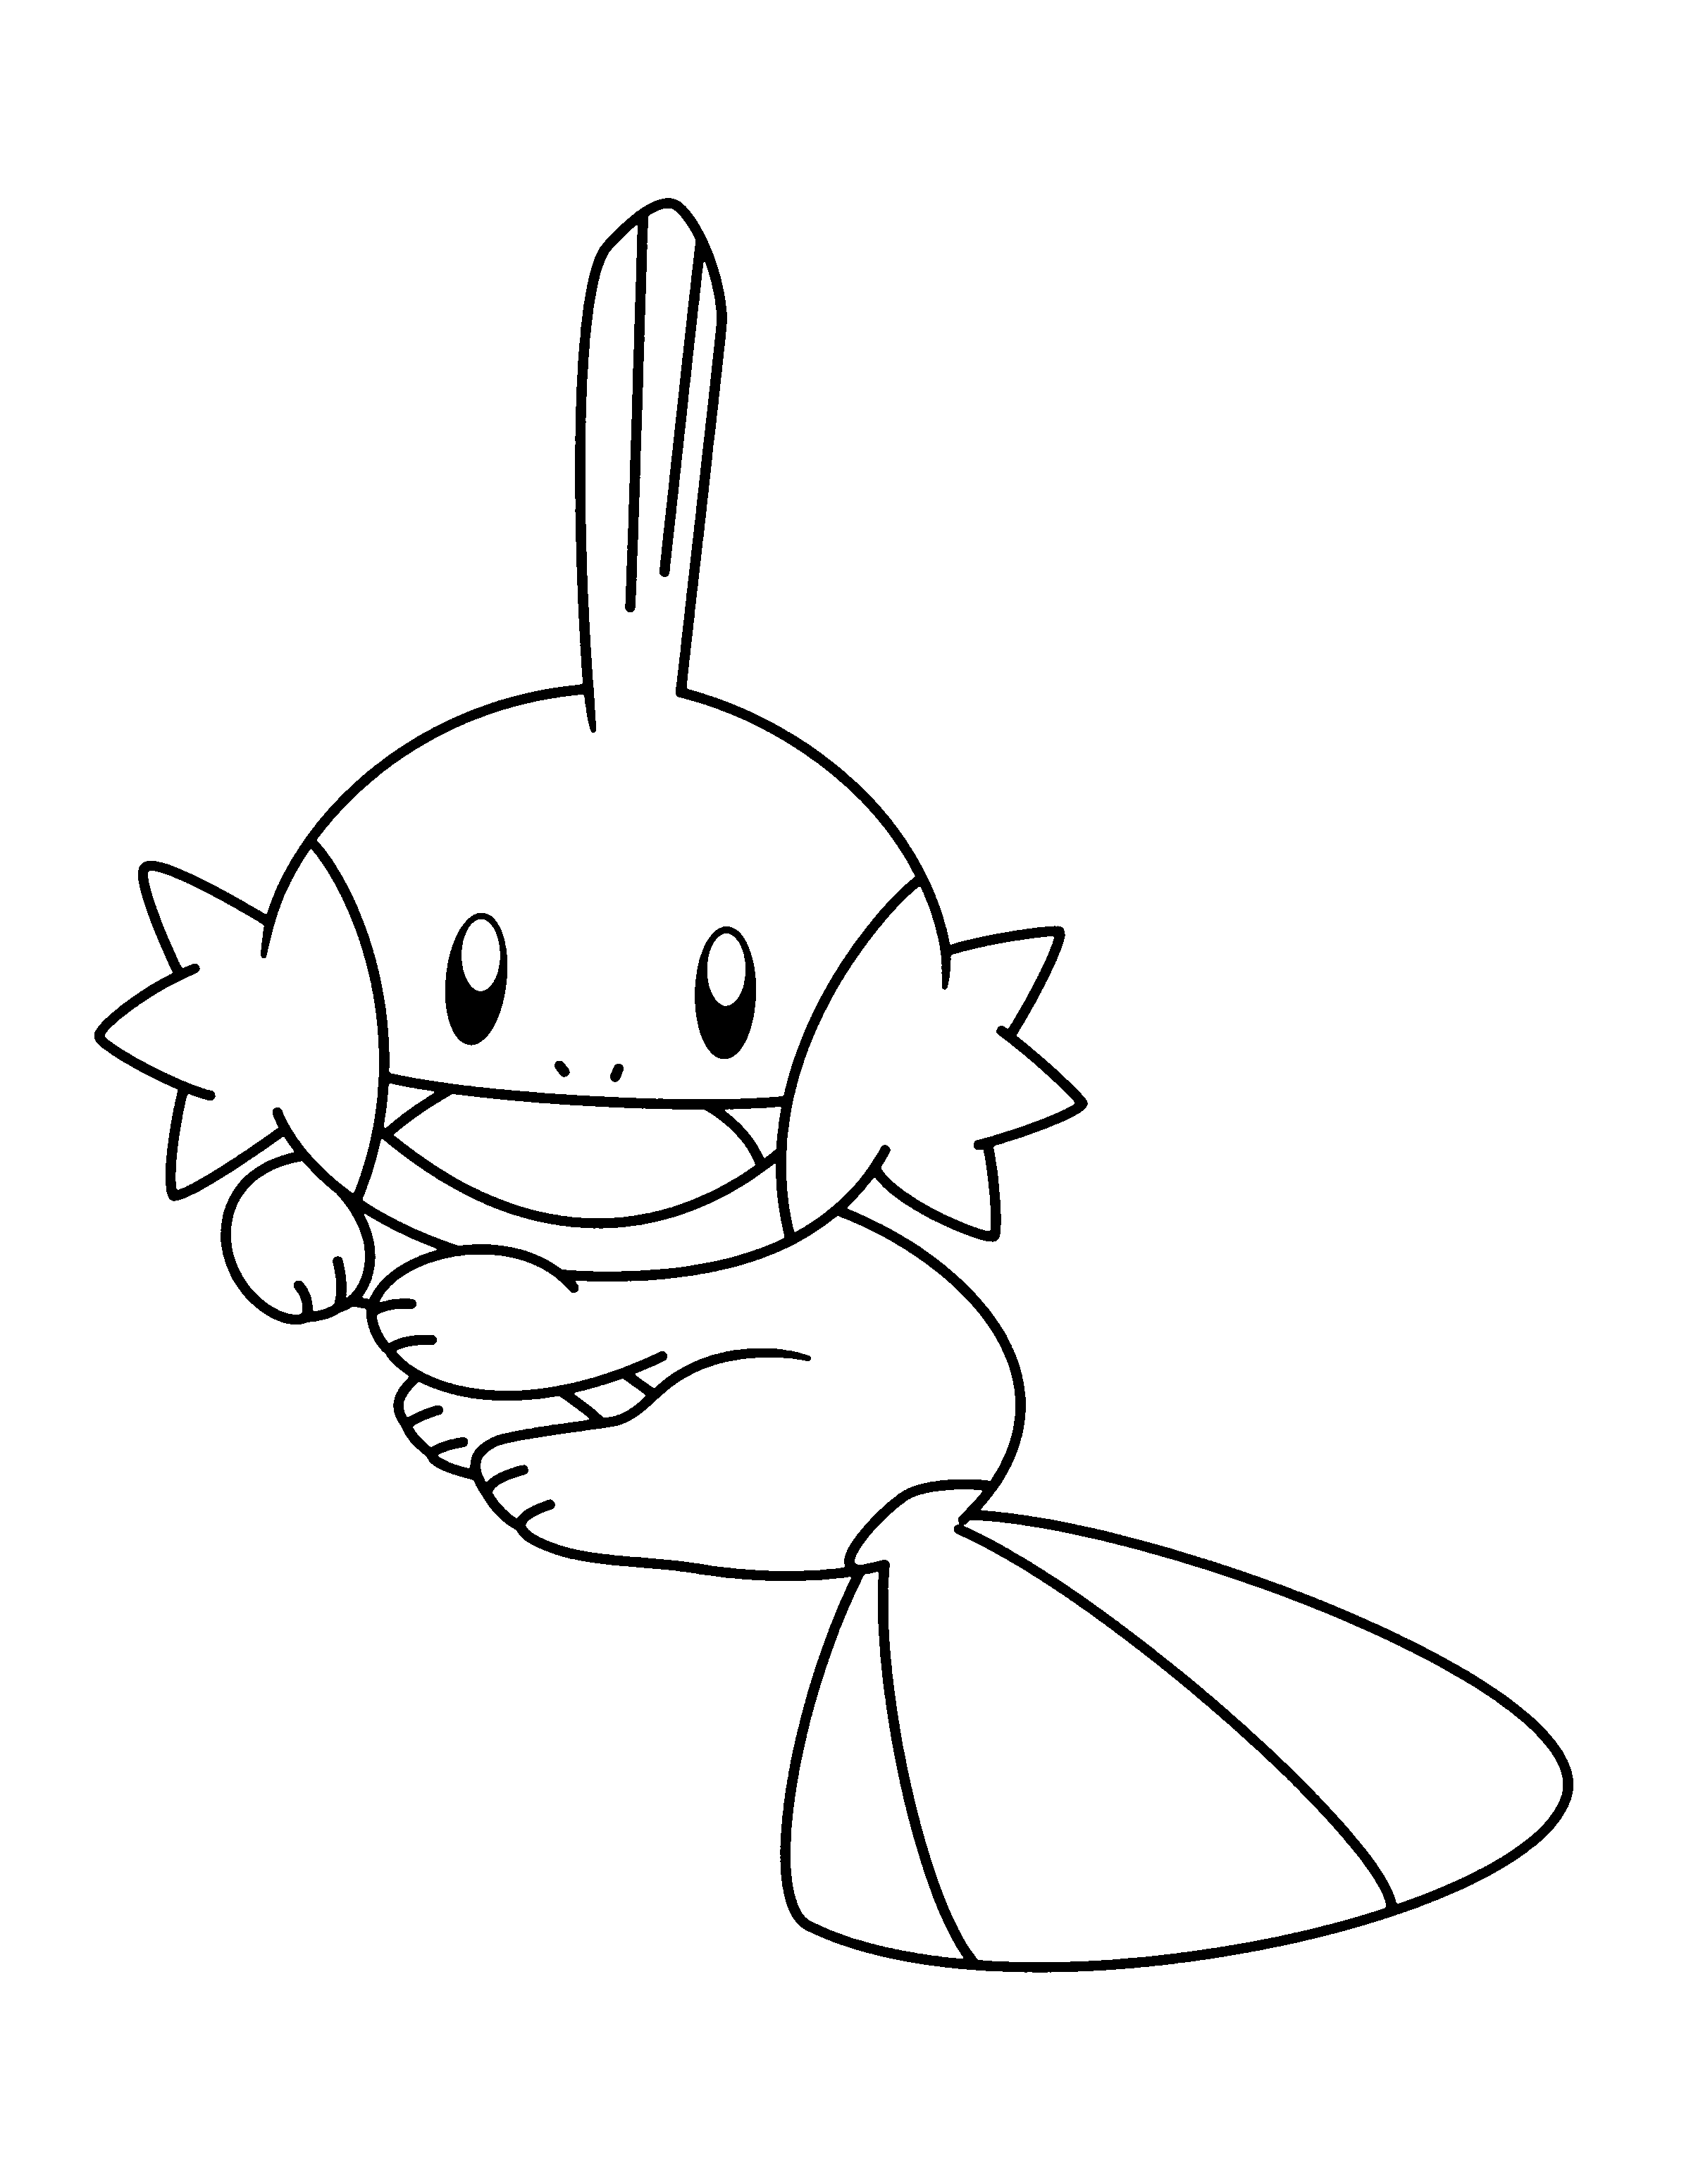 animated-coloring-pages-pokemon-image-0941